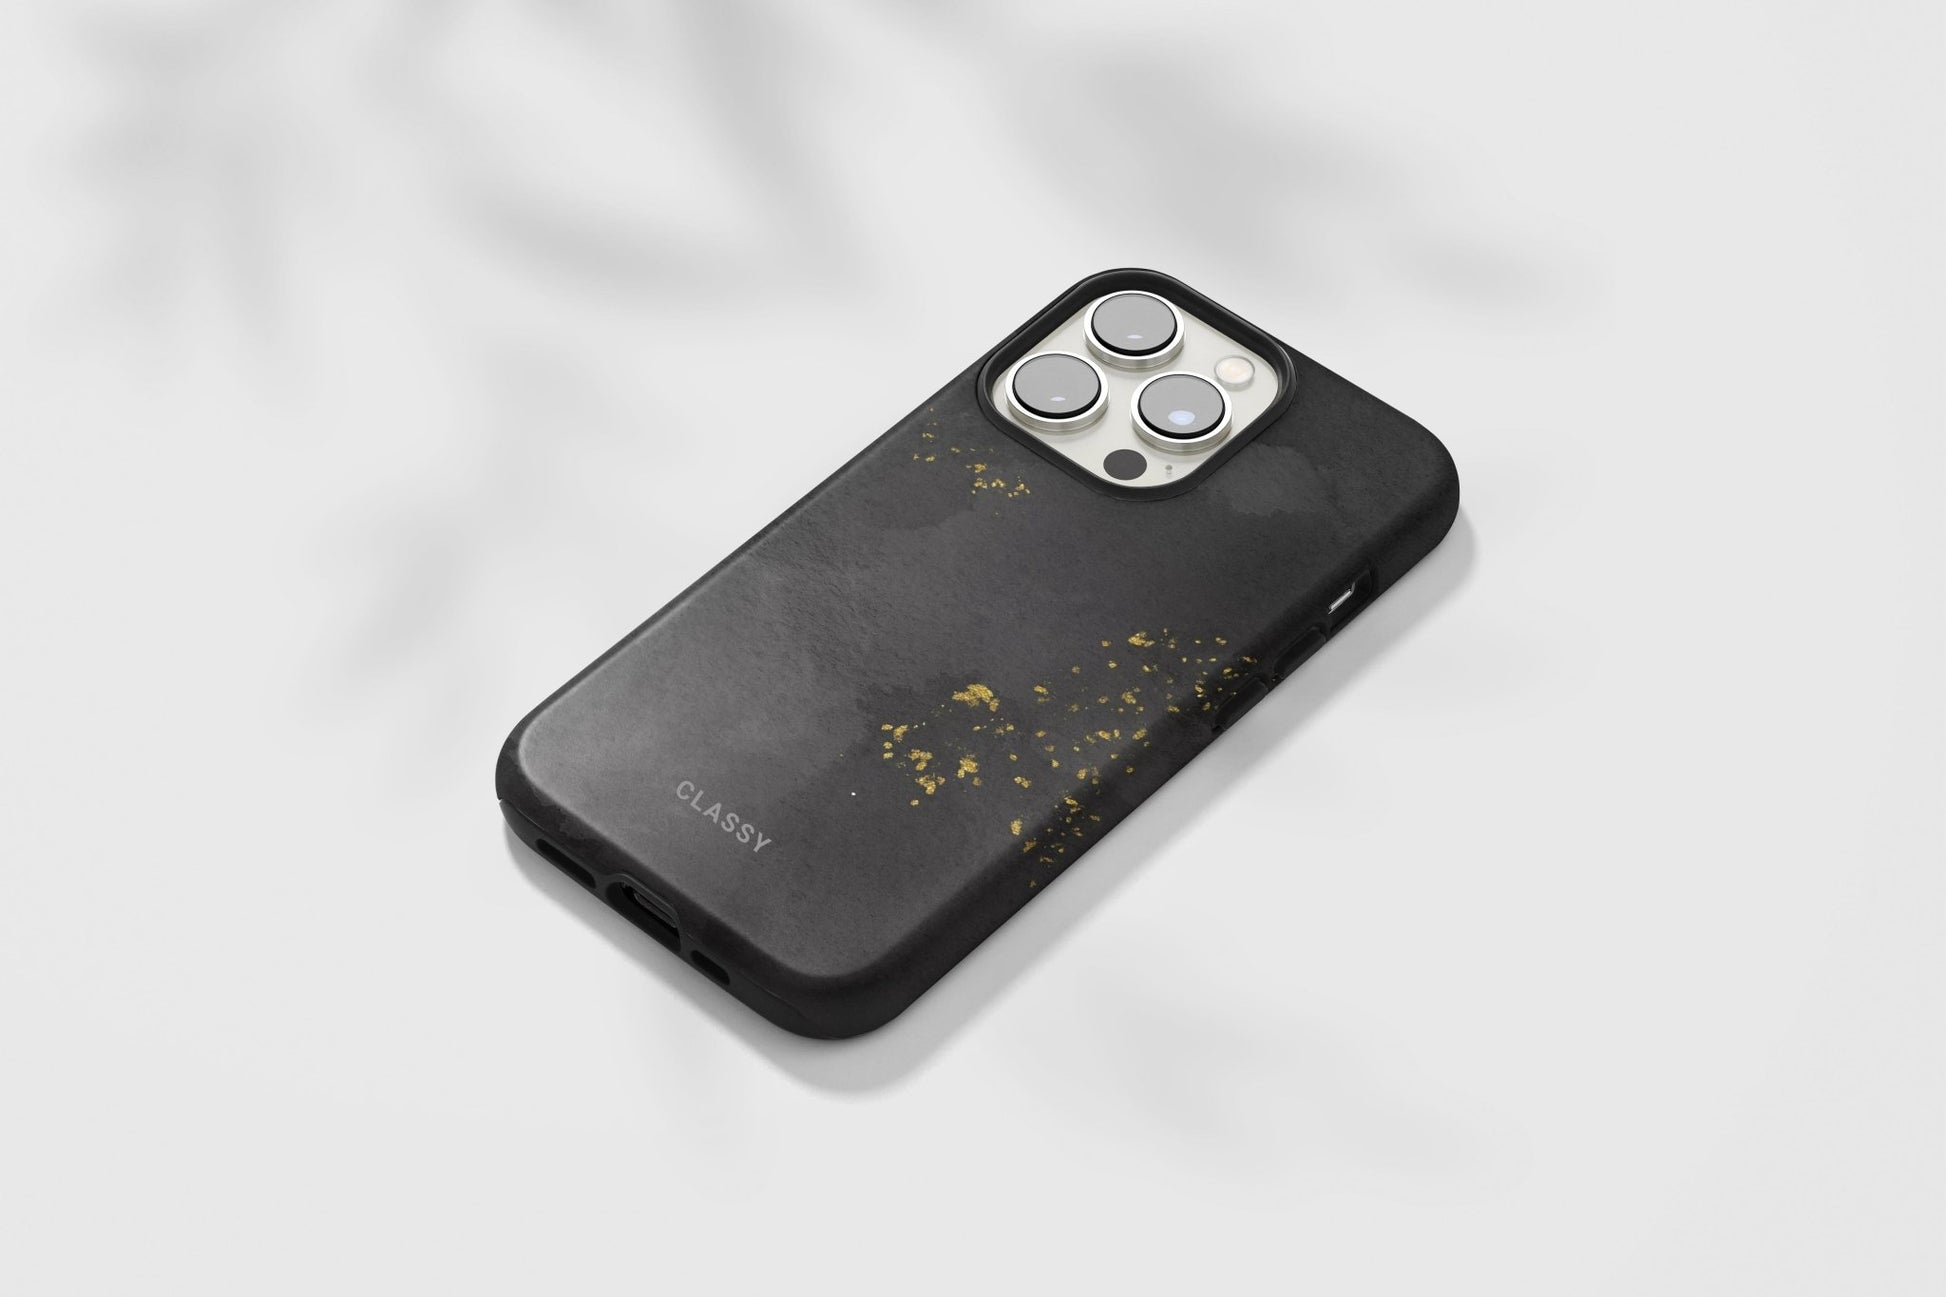 Black and Gold Tough Case with Sprinkles - Classy Cases